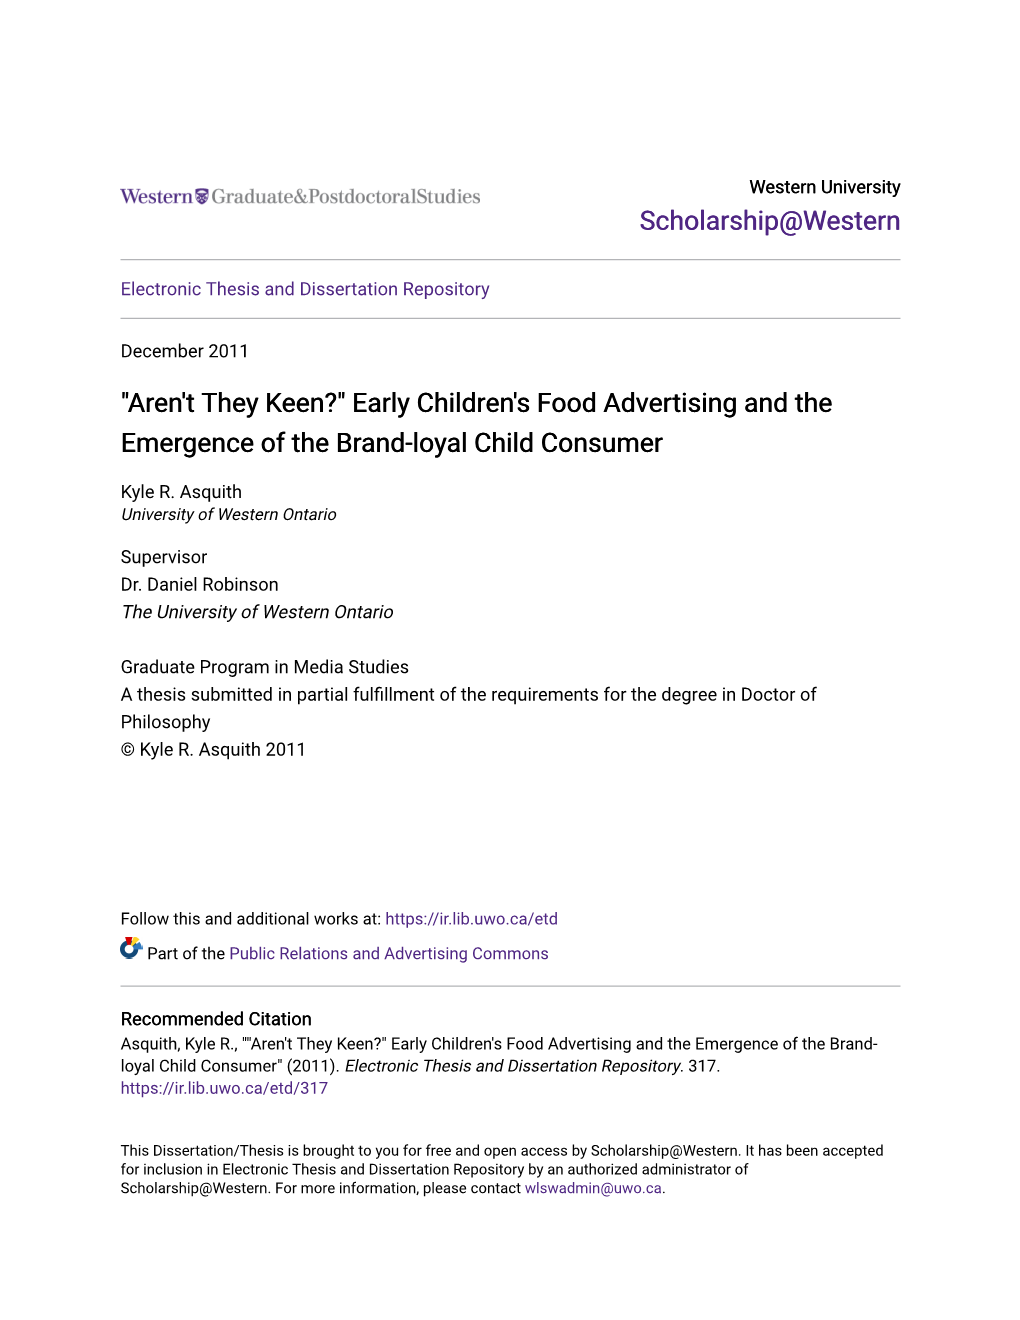 Early Children's Food Advertising and the Emergence of the Brand-Loyal Child Consumer